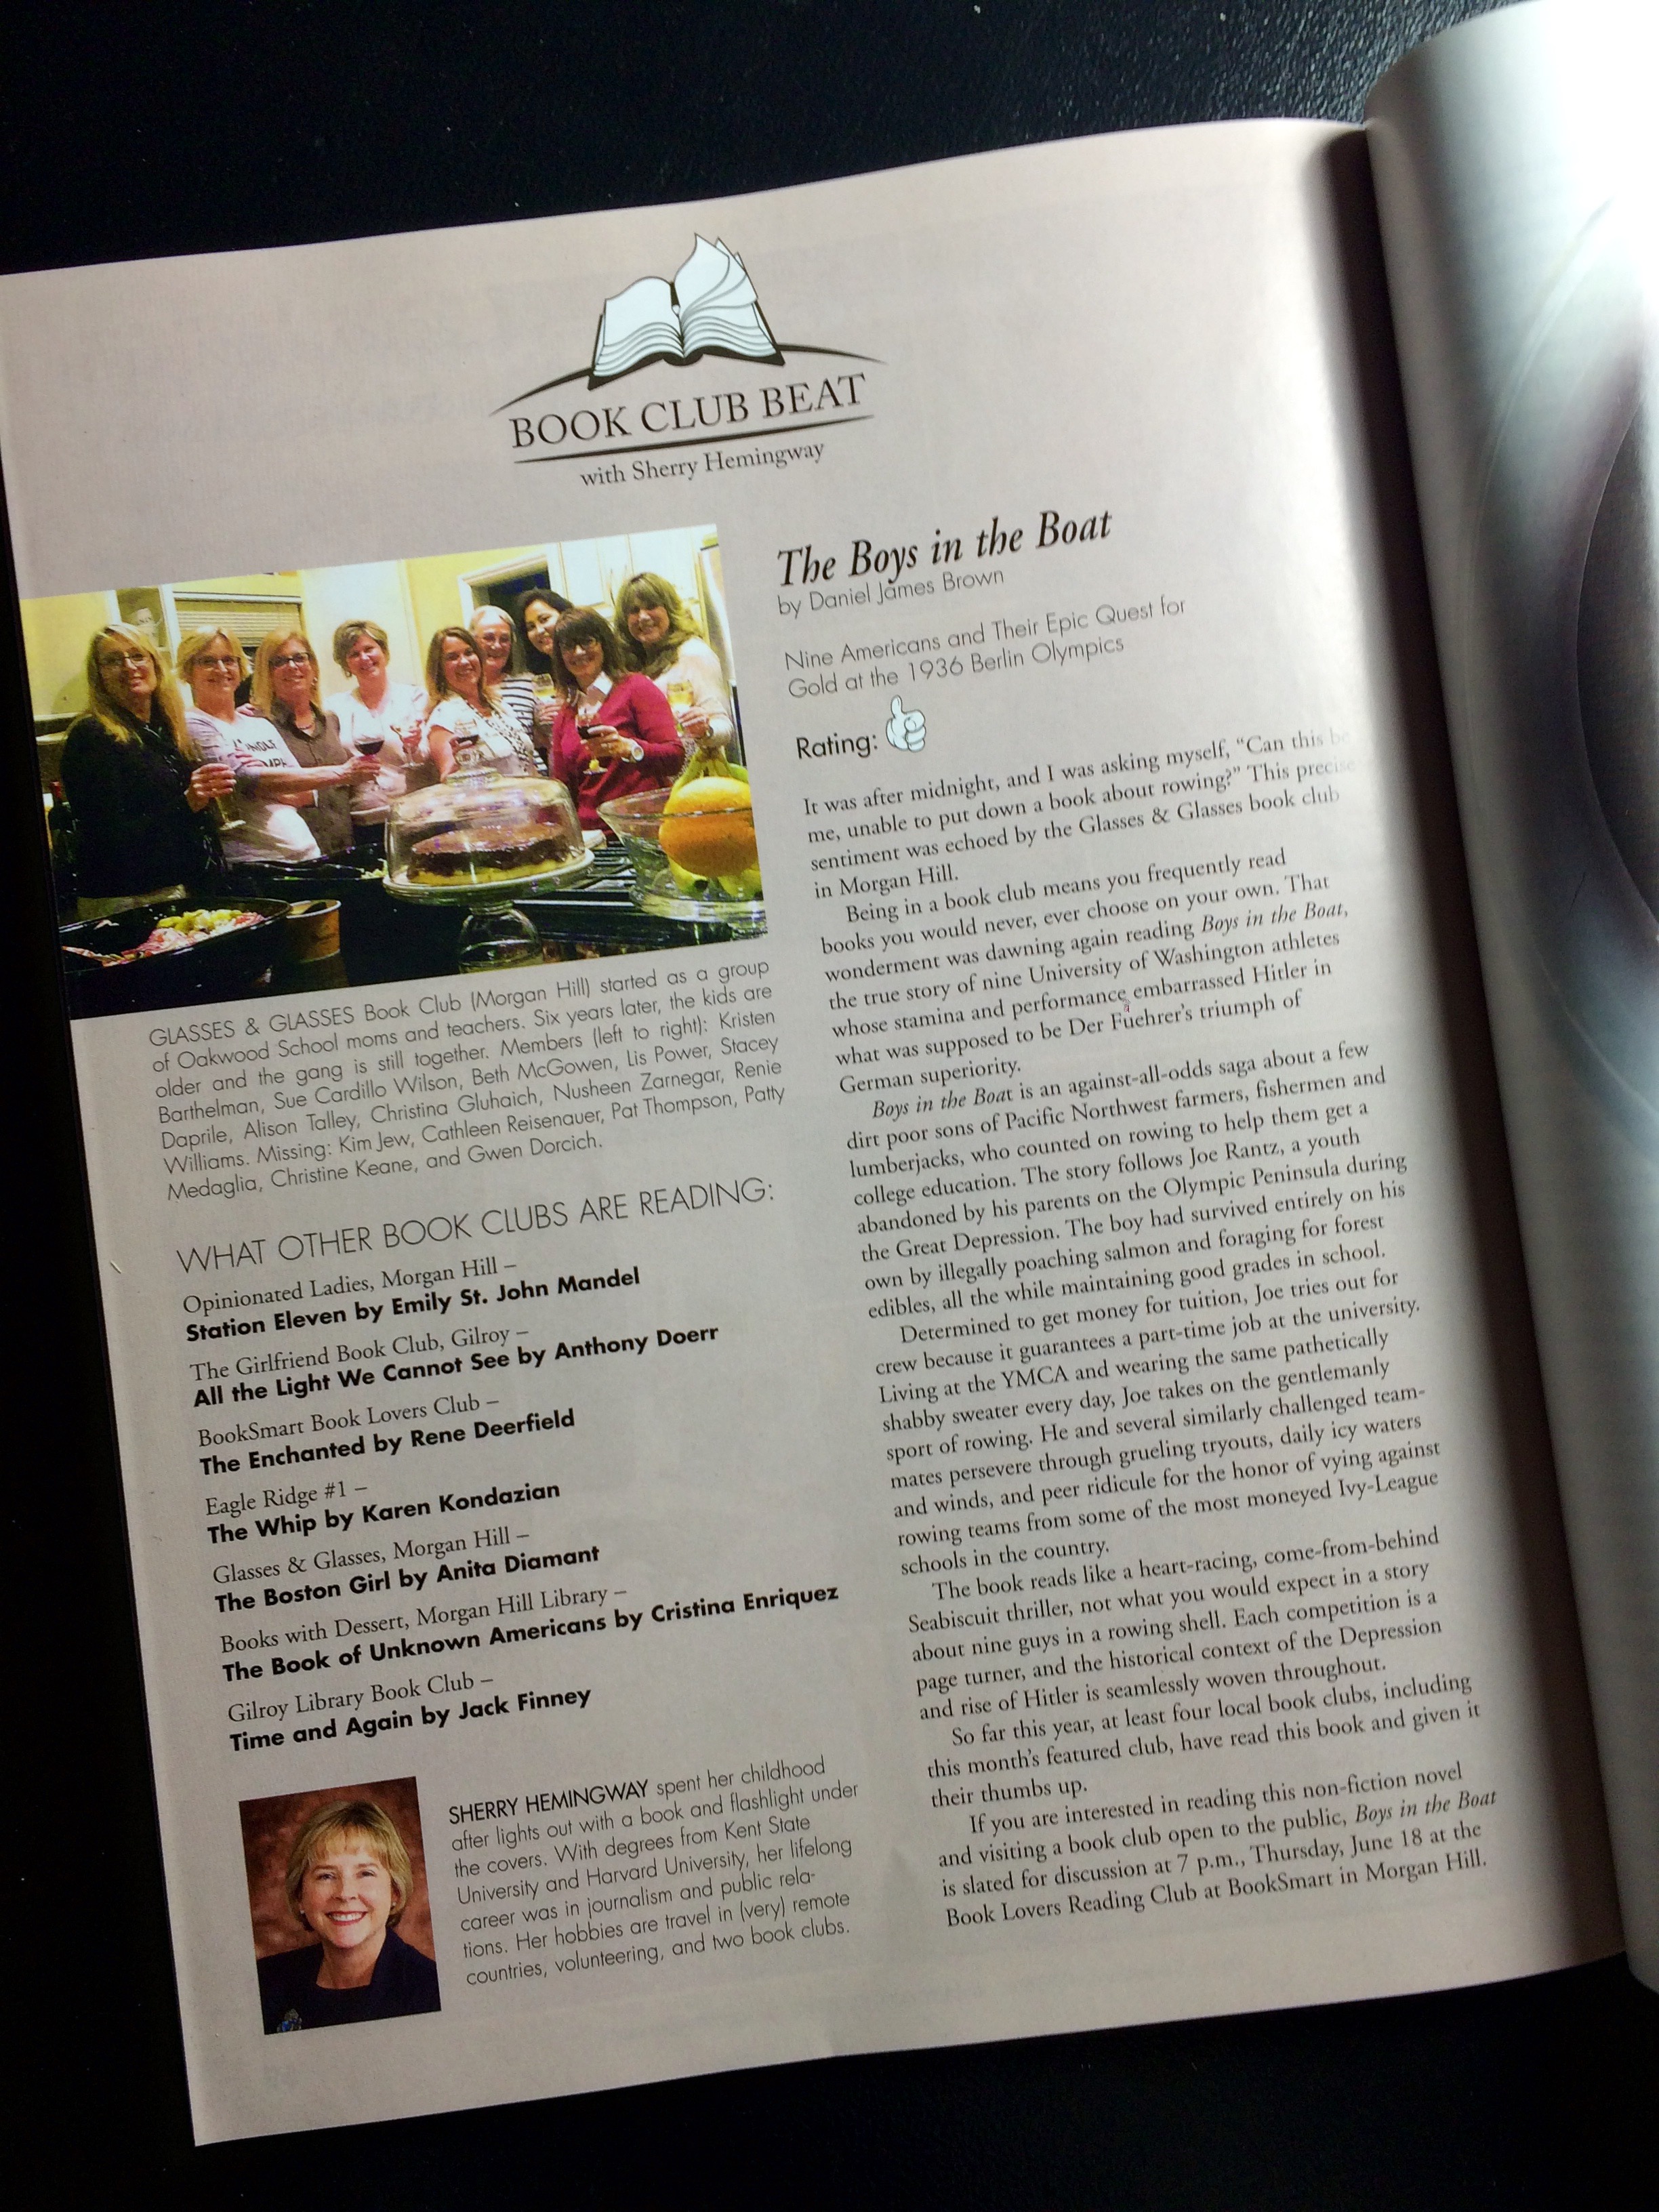 Our book club, Glasses & Glasses, was featured in a local magazine's Book Beat.